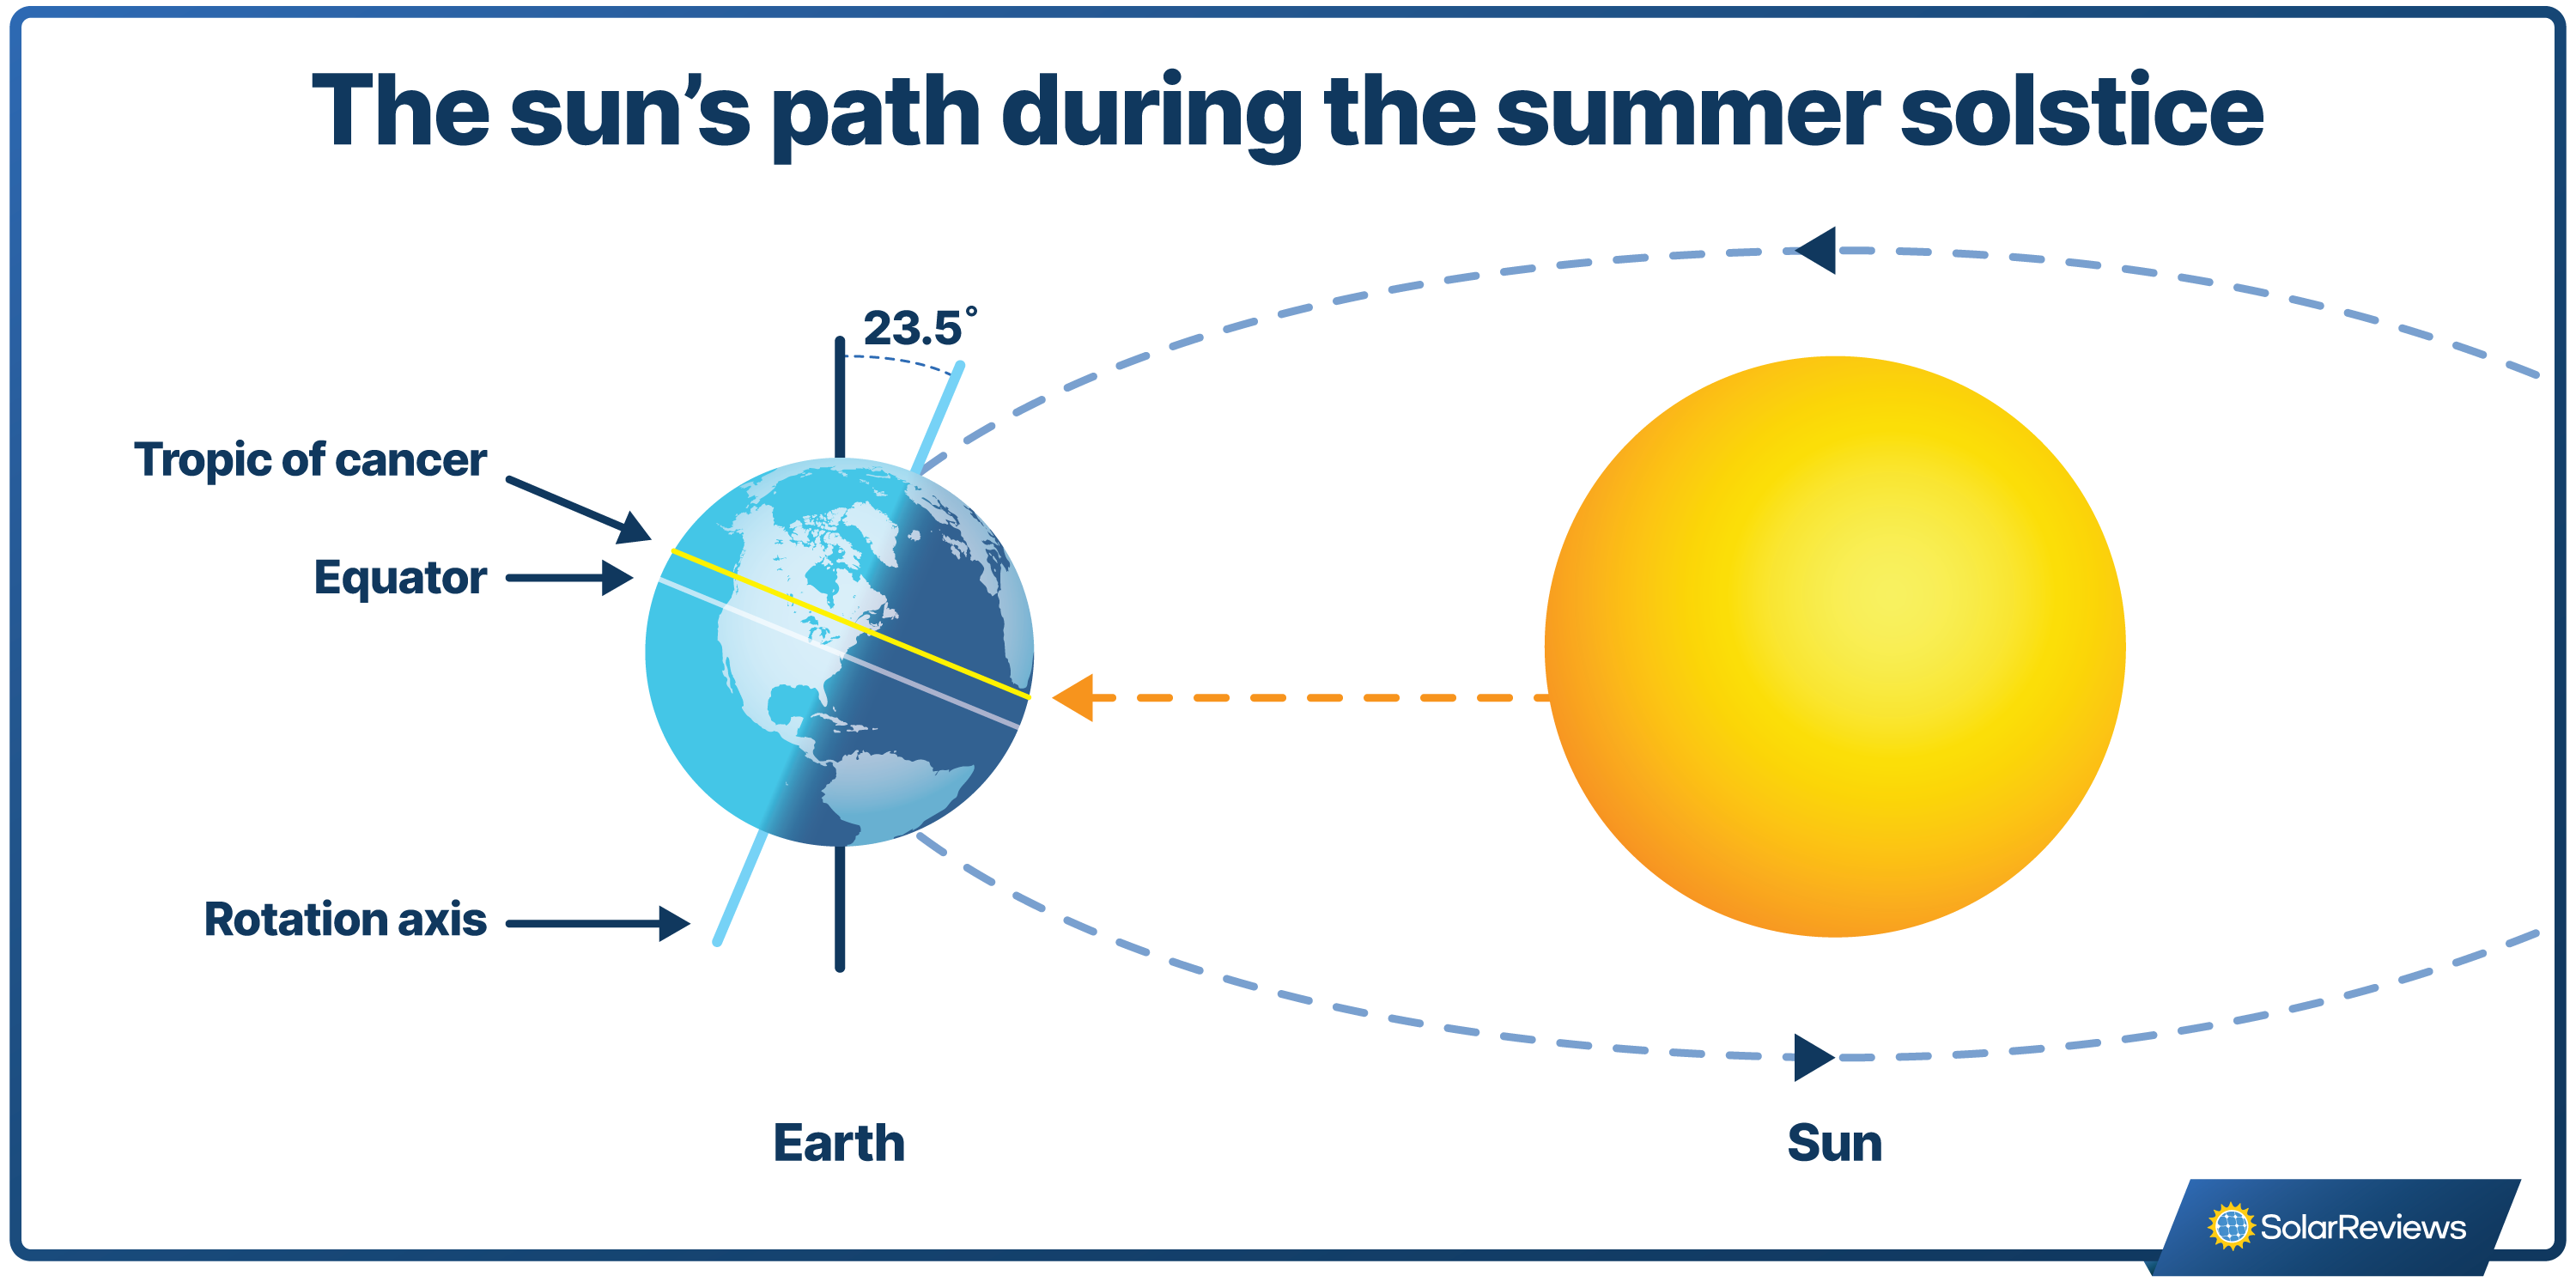 graphic depiction of the sun's path around the earth during the summer solstice